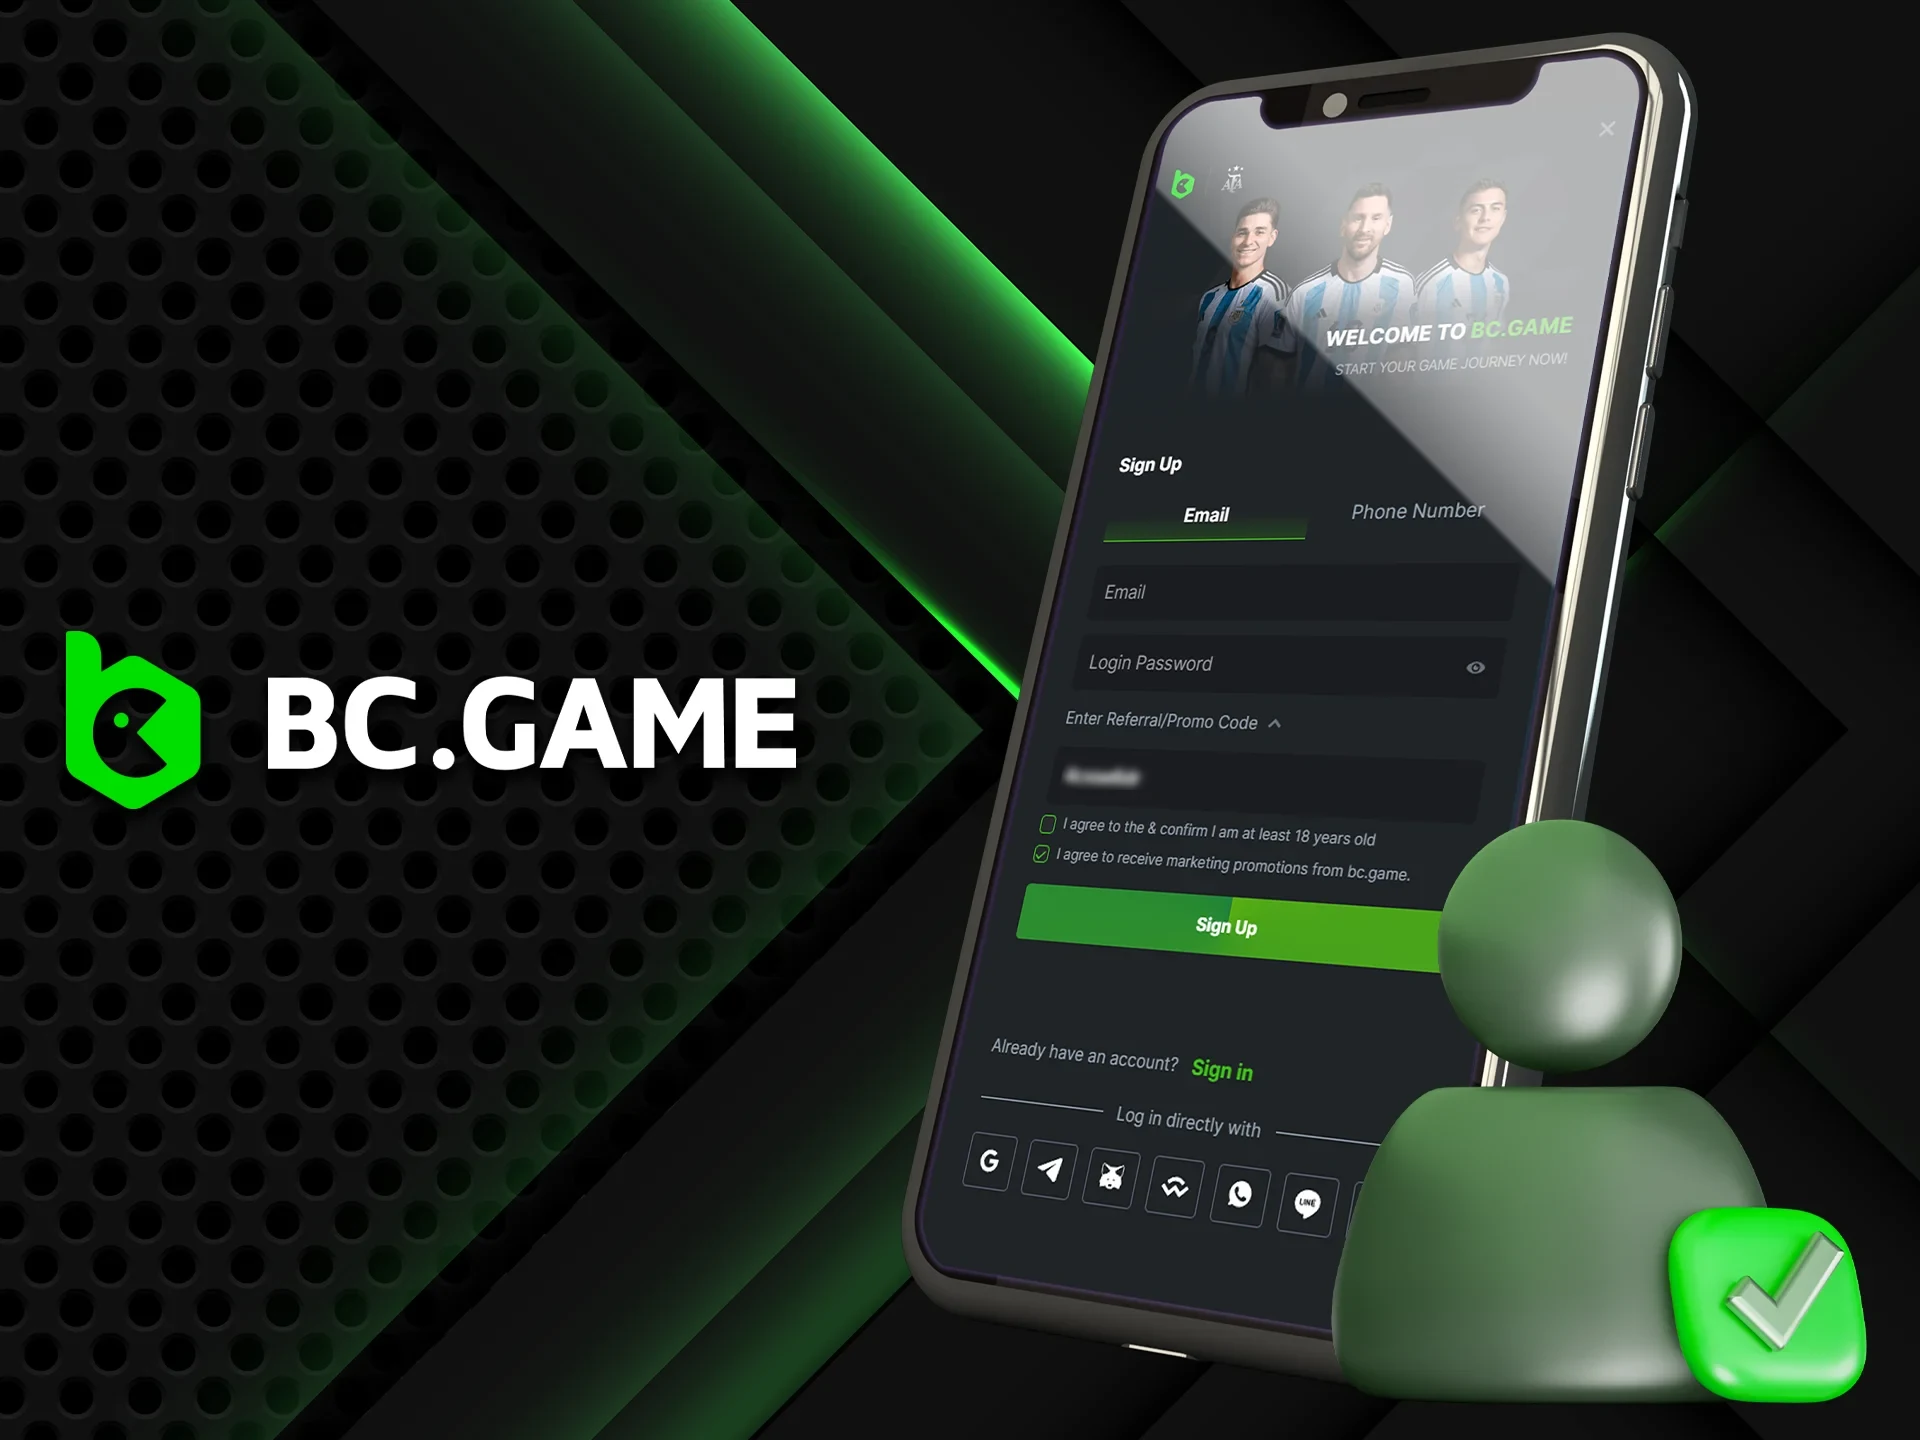 You can sign up for the BC GAME app via email or phone number.